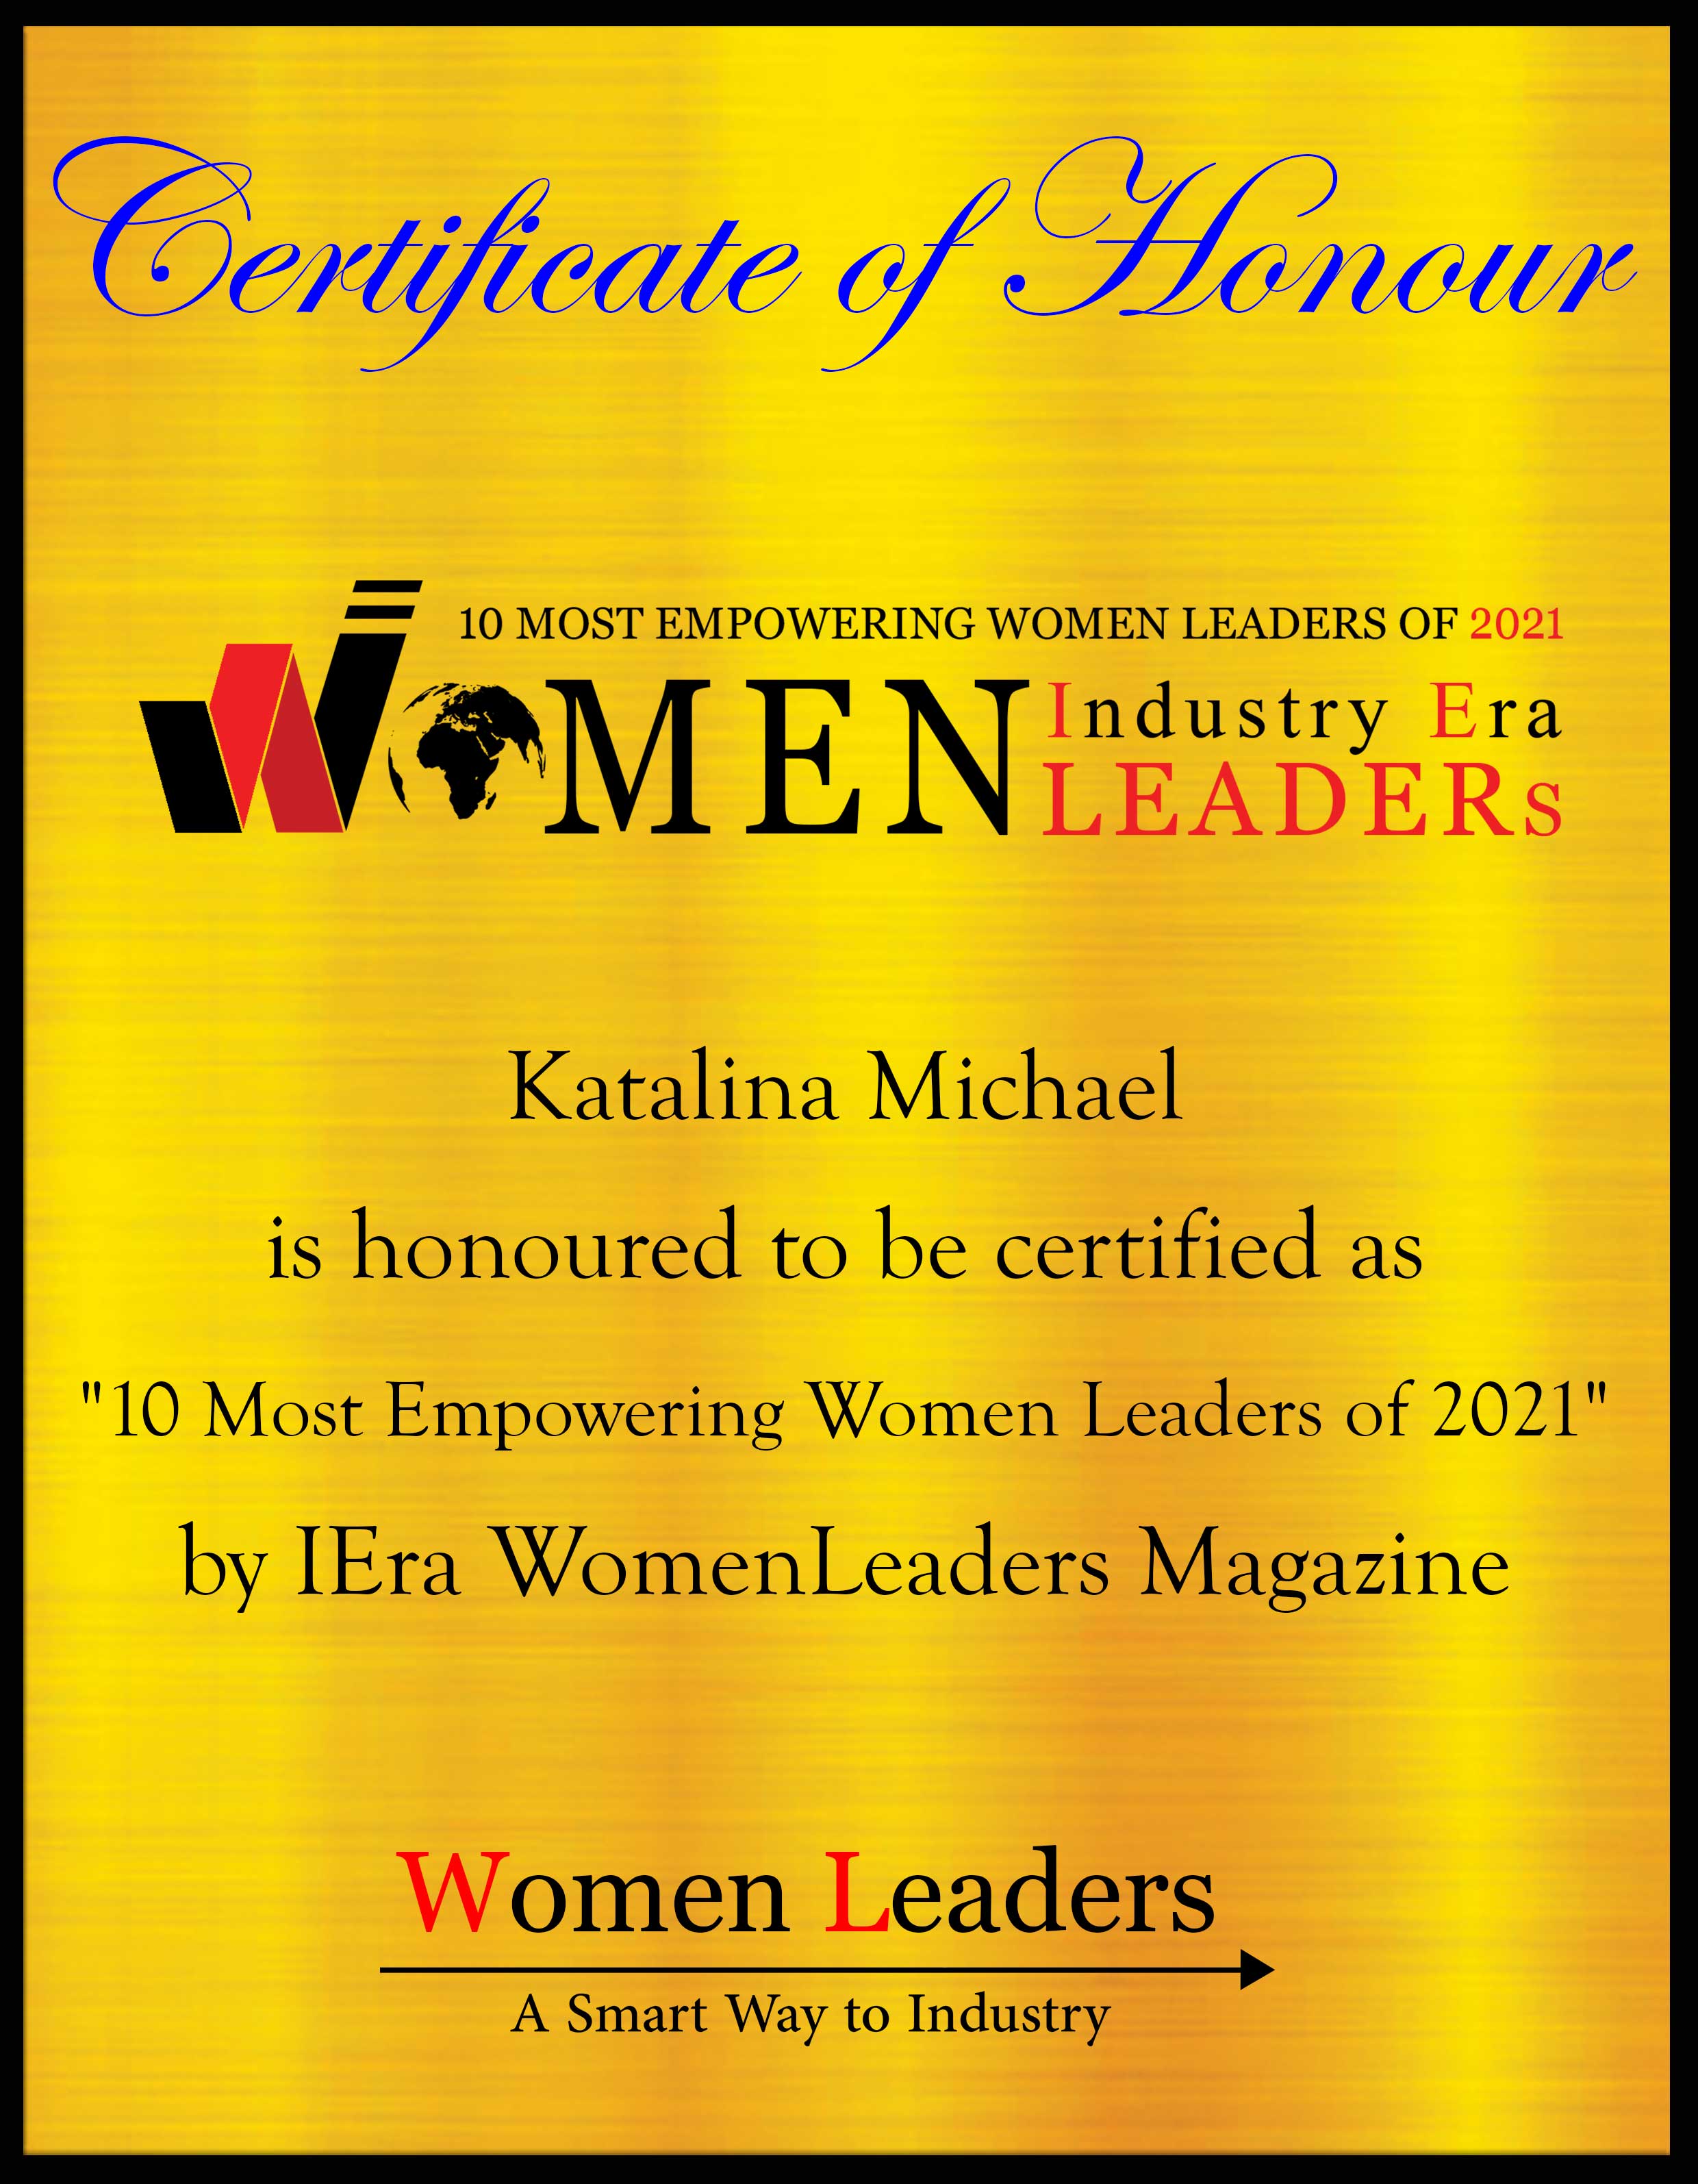 Katalina Michael, Executive Director/ Compliance, AML,DPO of BDSwiss Group, Most Empowering Women Leaders of 2021